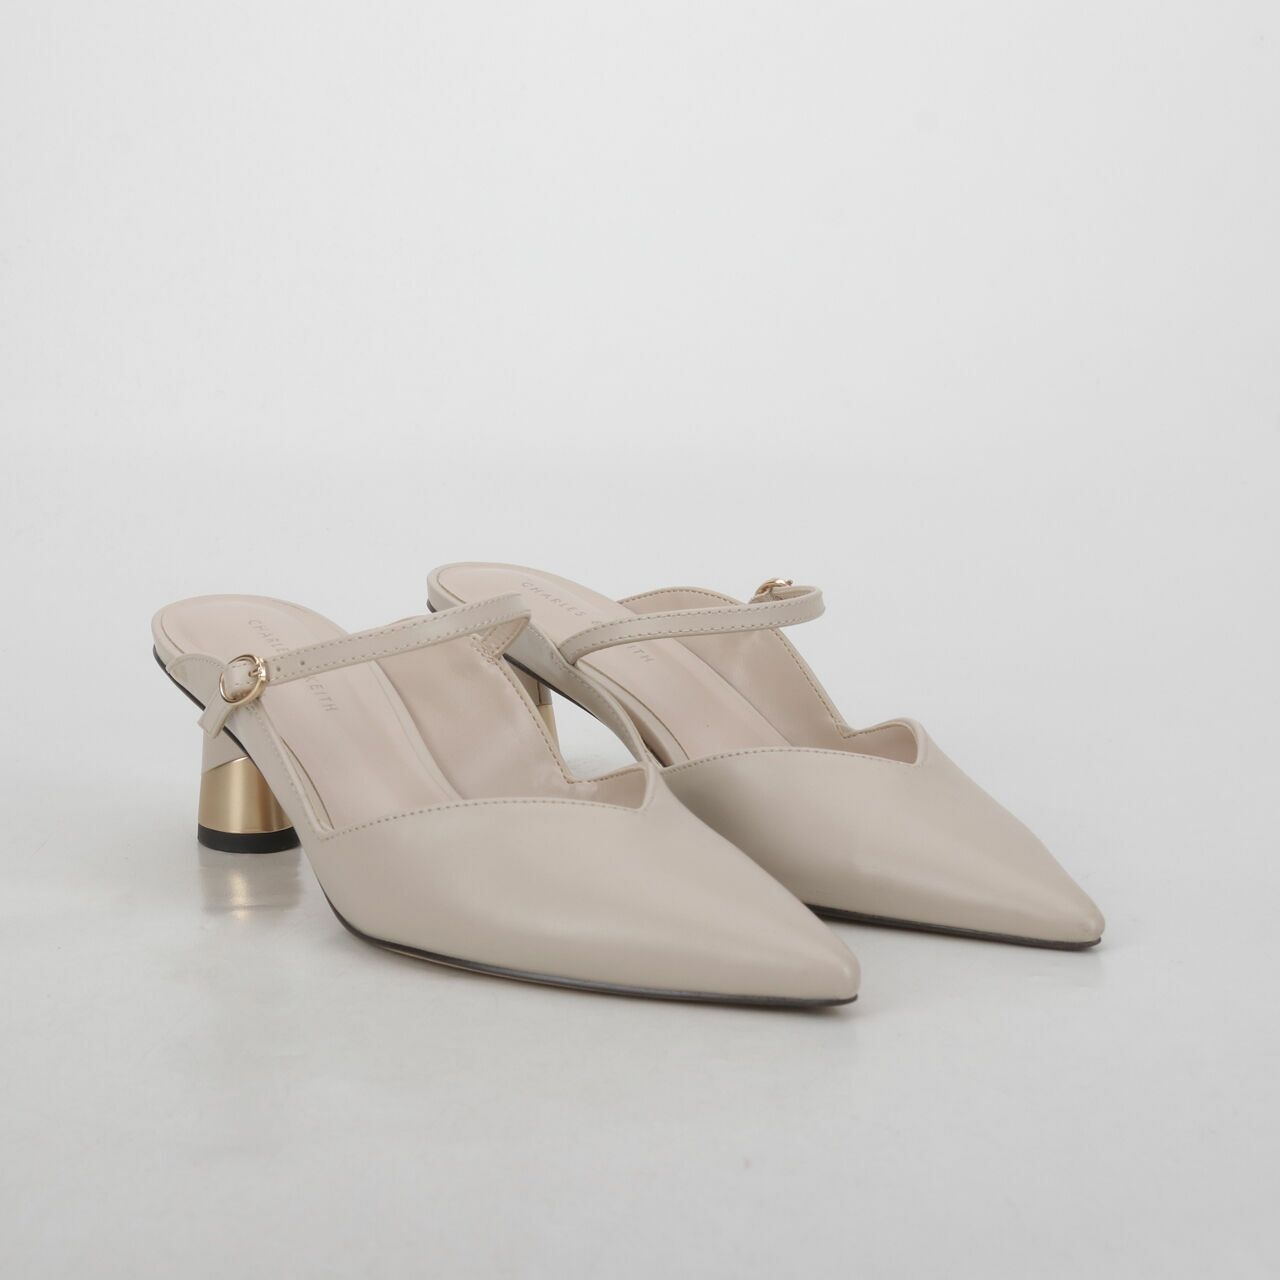 Charles & Keith Beige Covered Open Back Mules Heels